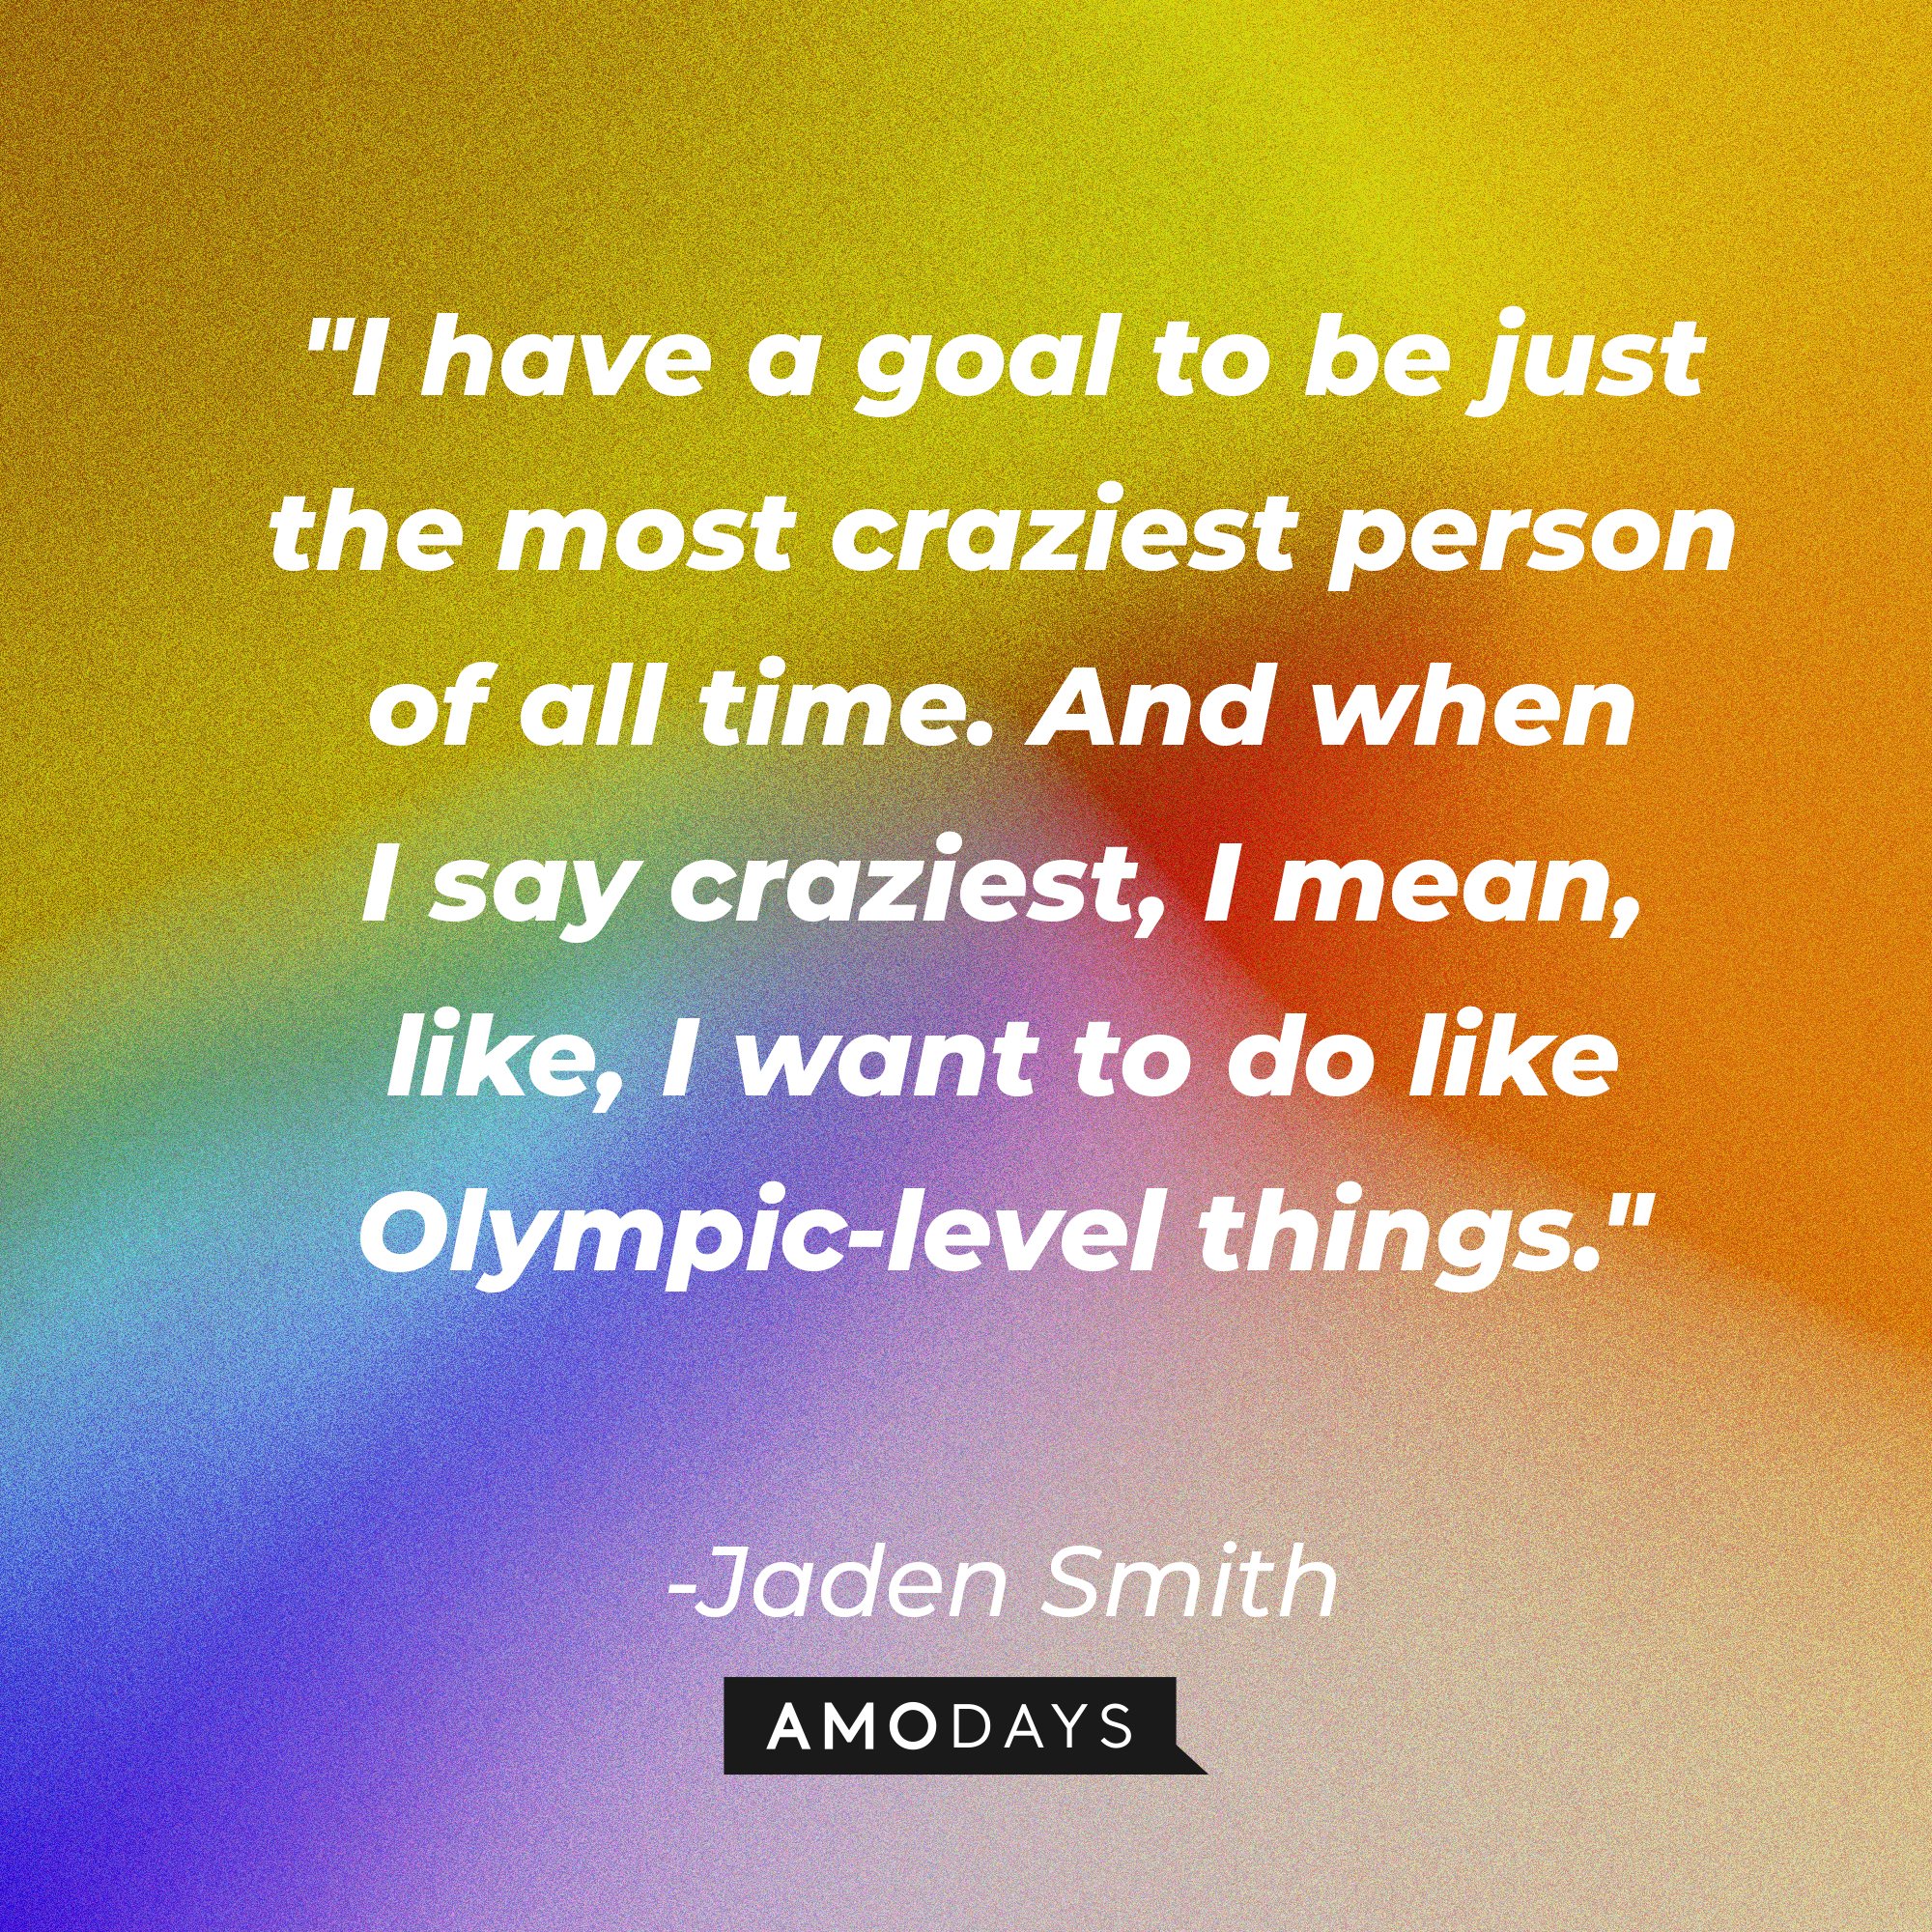 Jaden Smith's quote: "I have a goal to be just the most craziest person of all time. And when I say craziest, I mean, like, I want to do like Olympic-level things." | Image: AmoDays